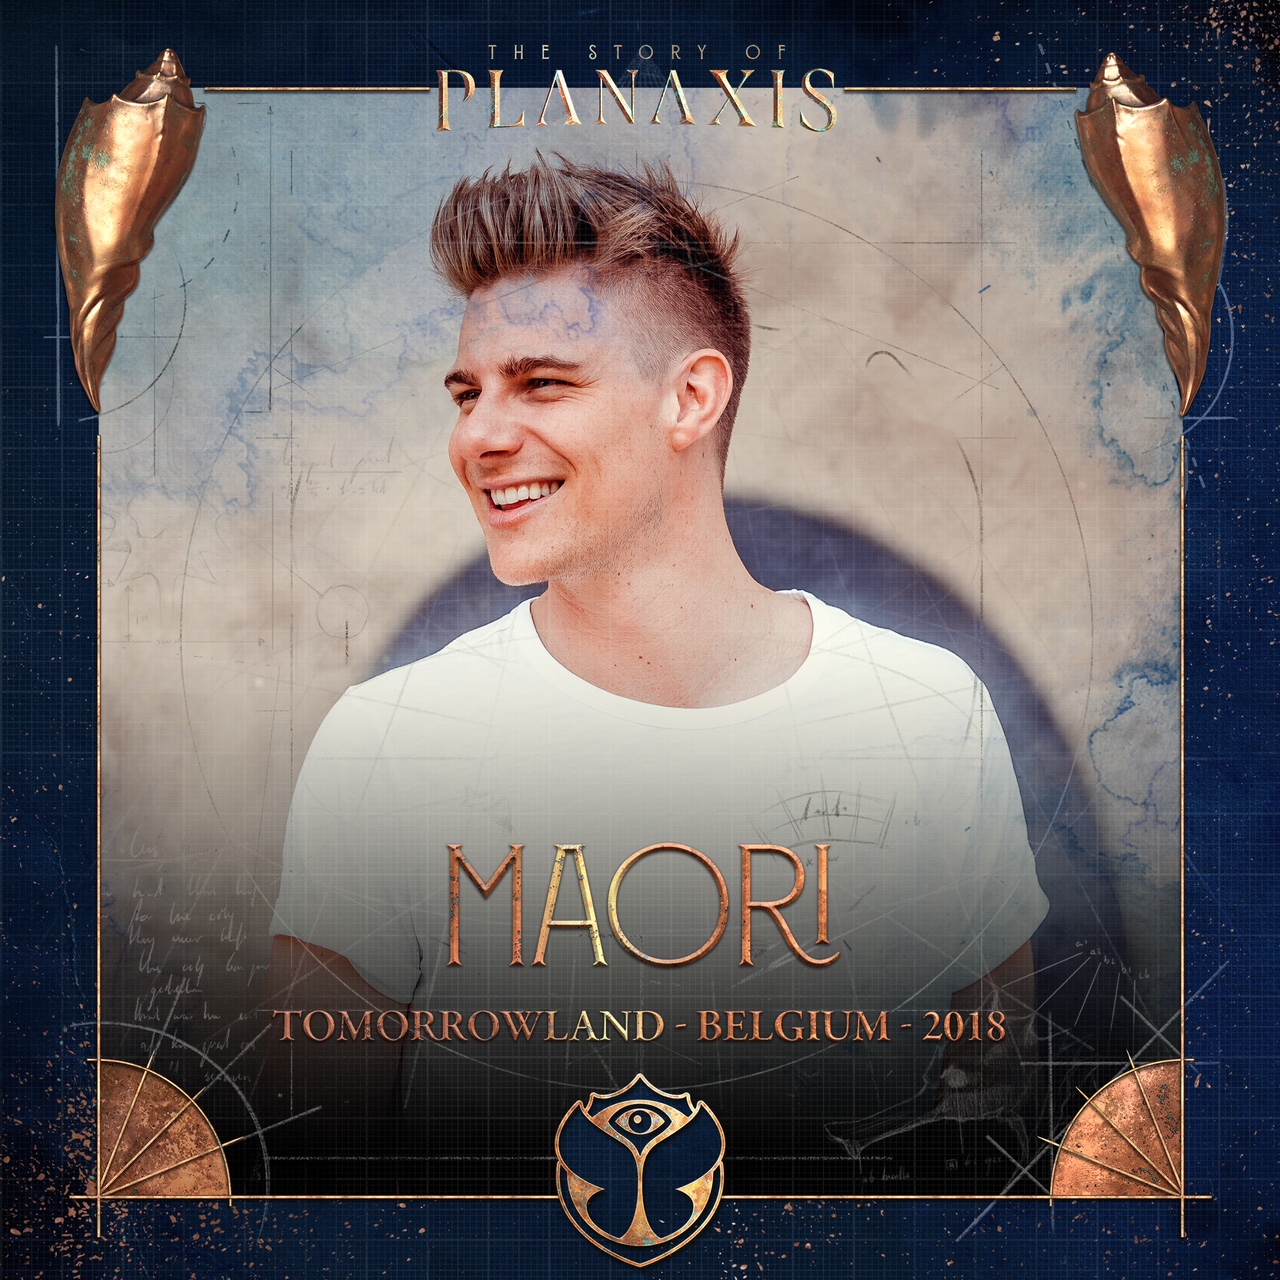 Clubhouse Radio by Maori - Episode #022 (Live at Tomorrowland 2018)